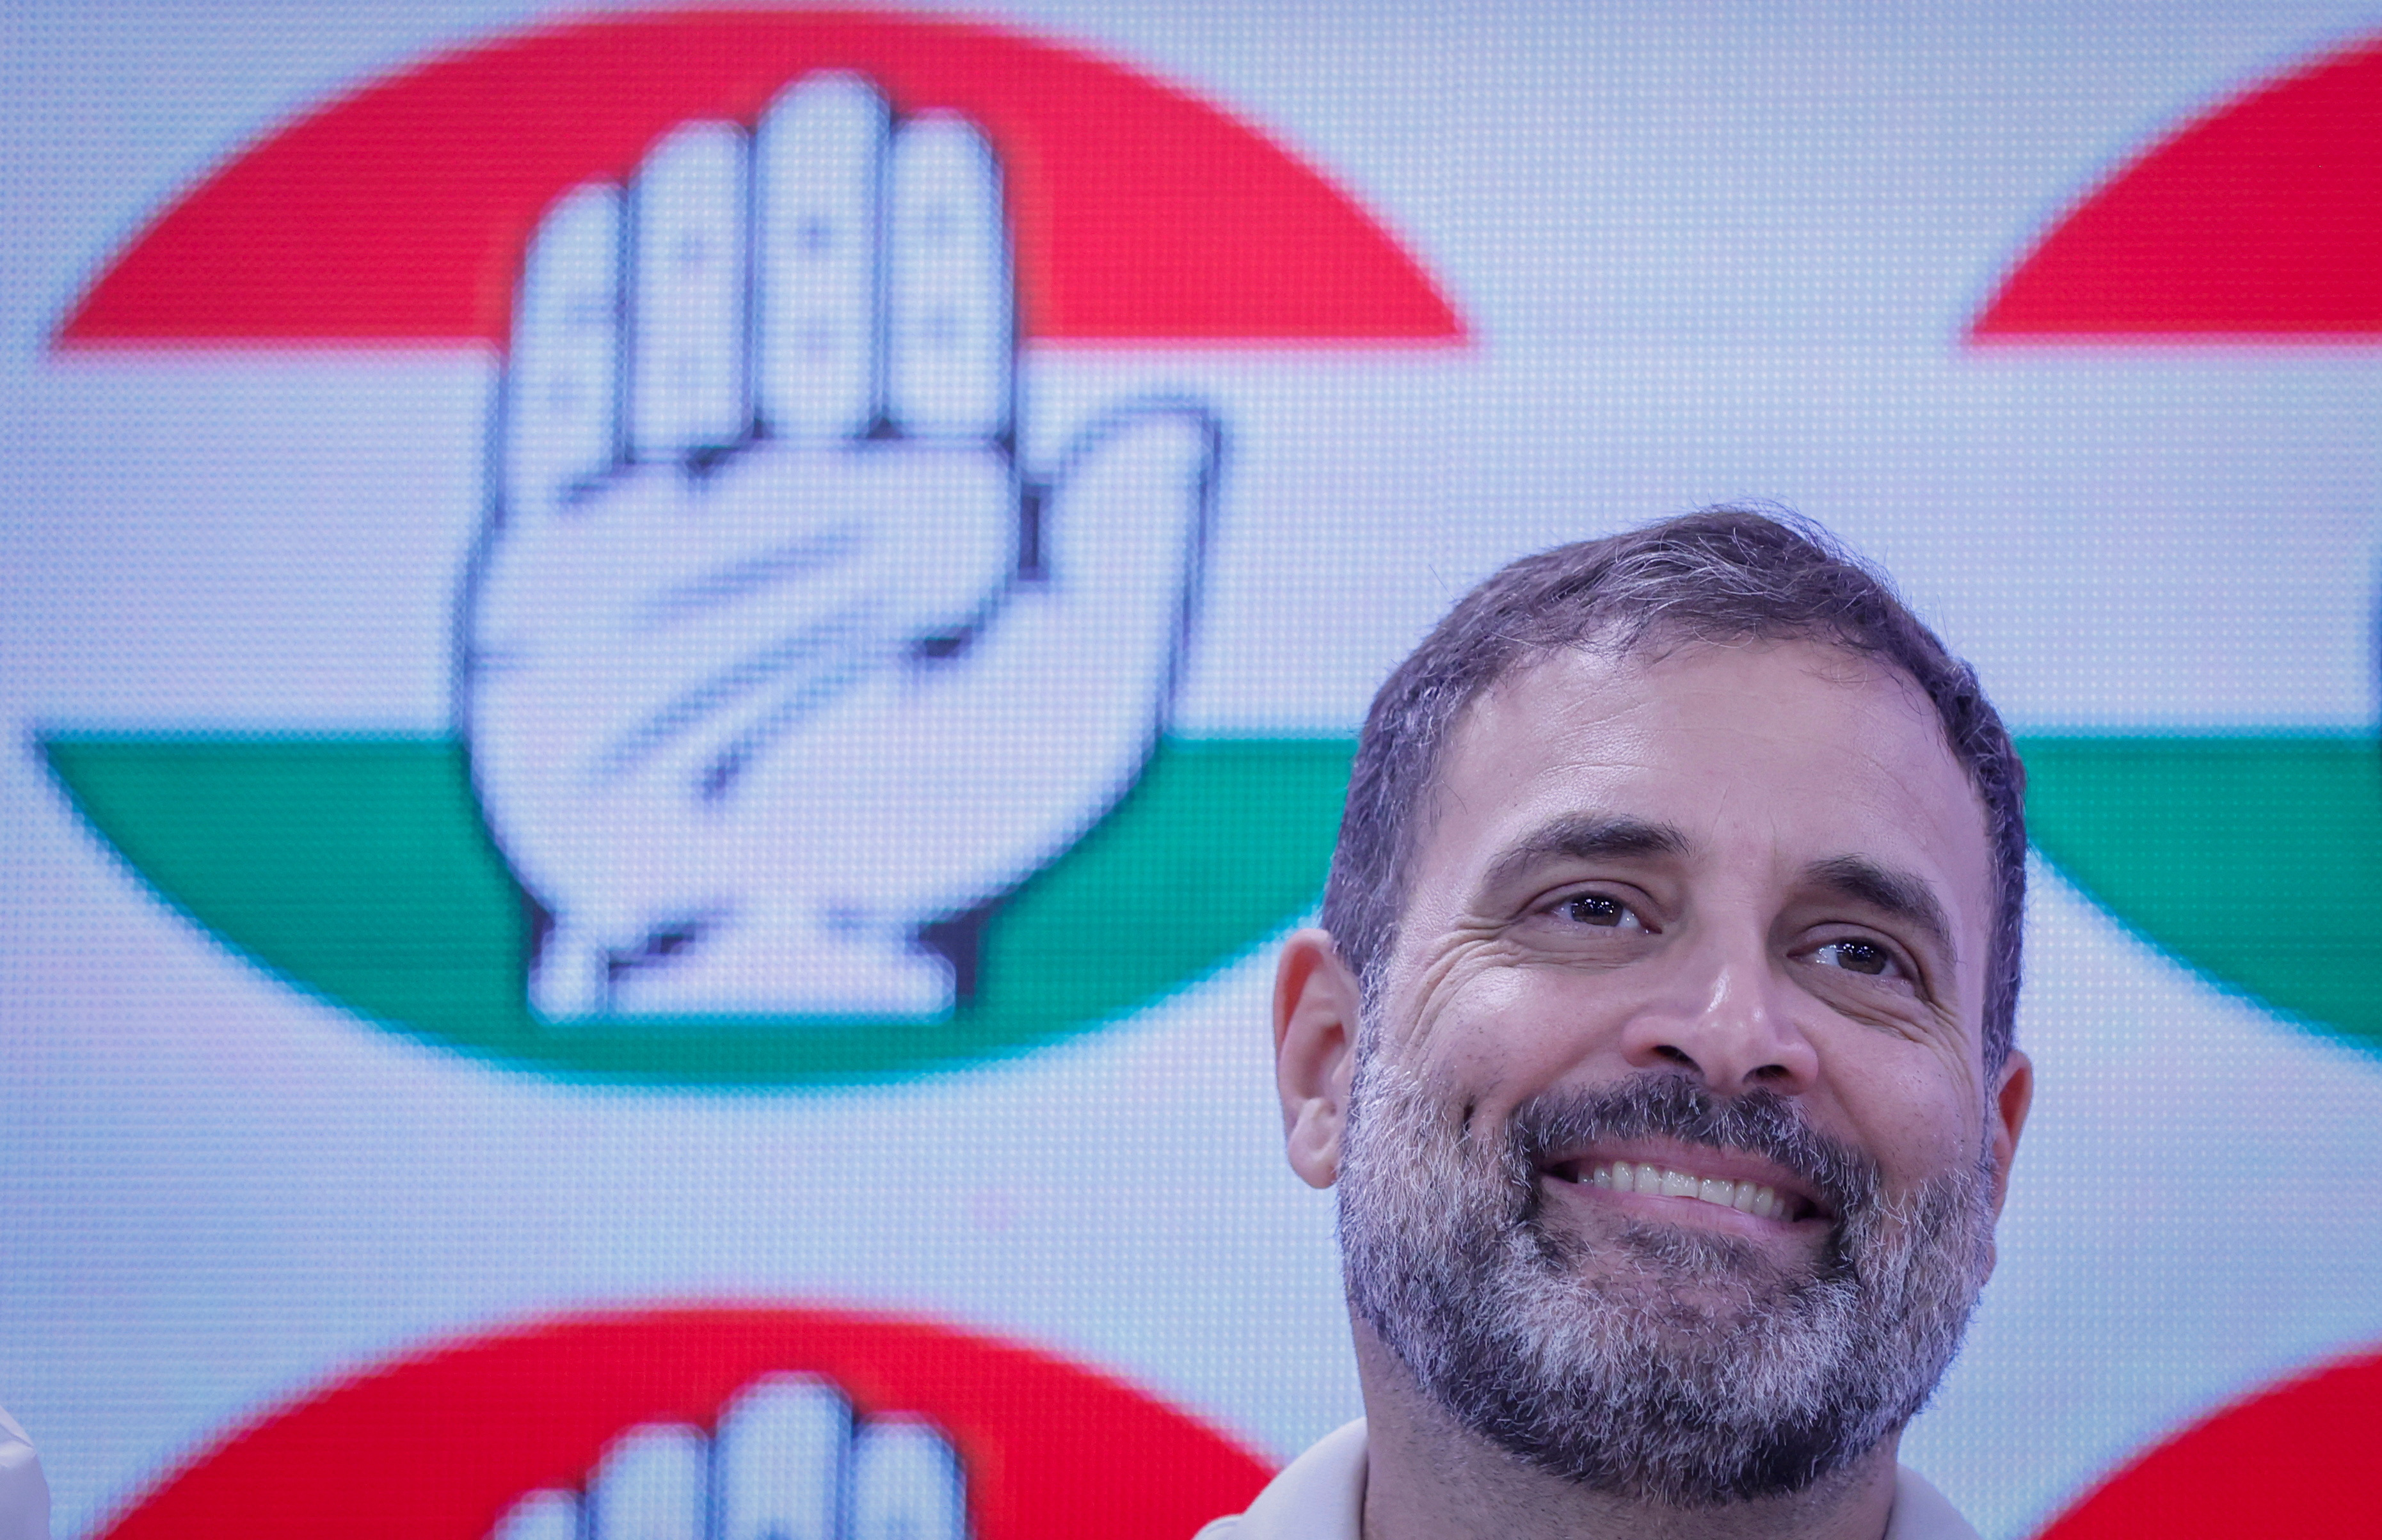 Rahul Gandhi, a senior leader of India's main opposition Congress party, during a press conference